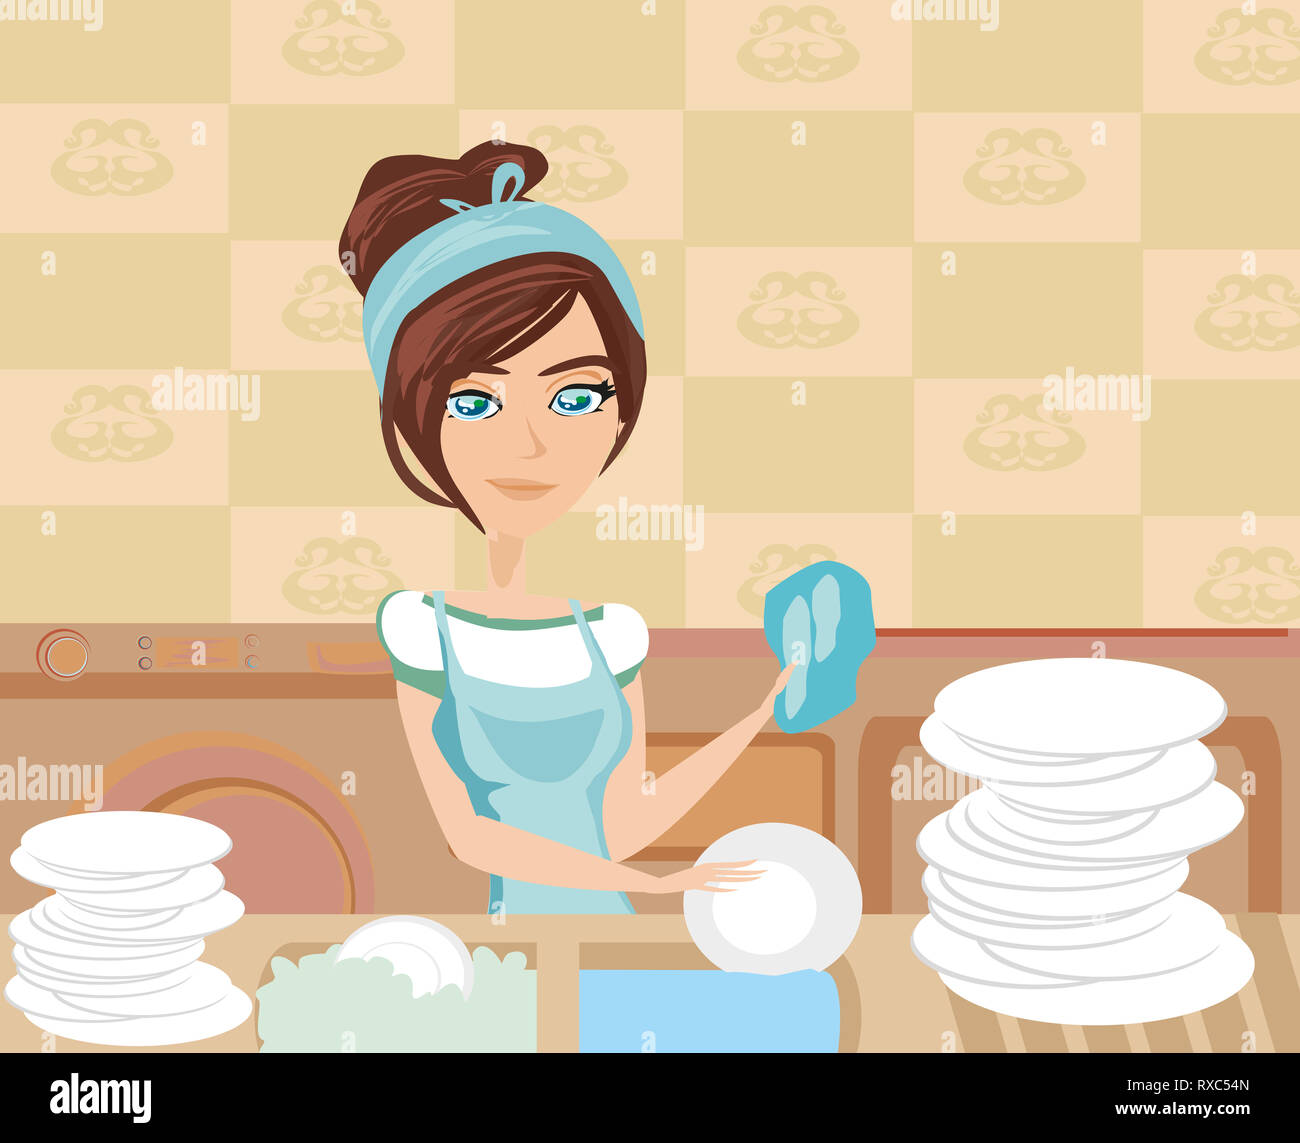 24,770 Woman Washing Dishes Images, Stock Photos, 3D objects, & Vectors